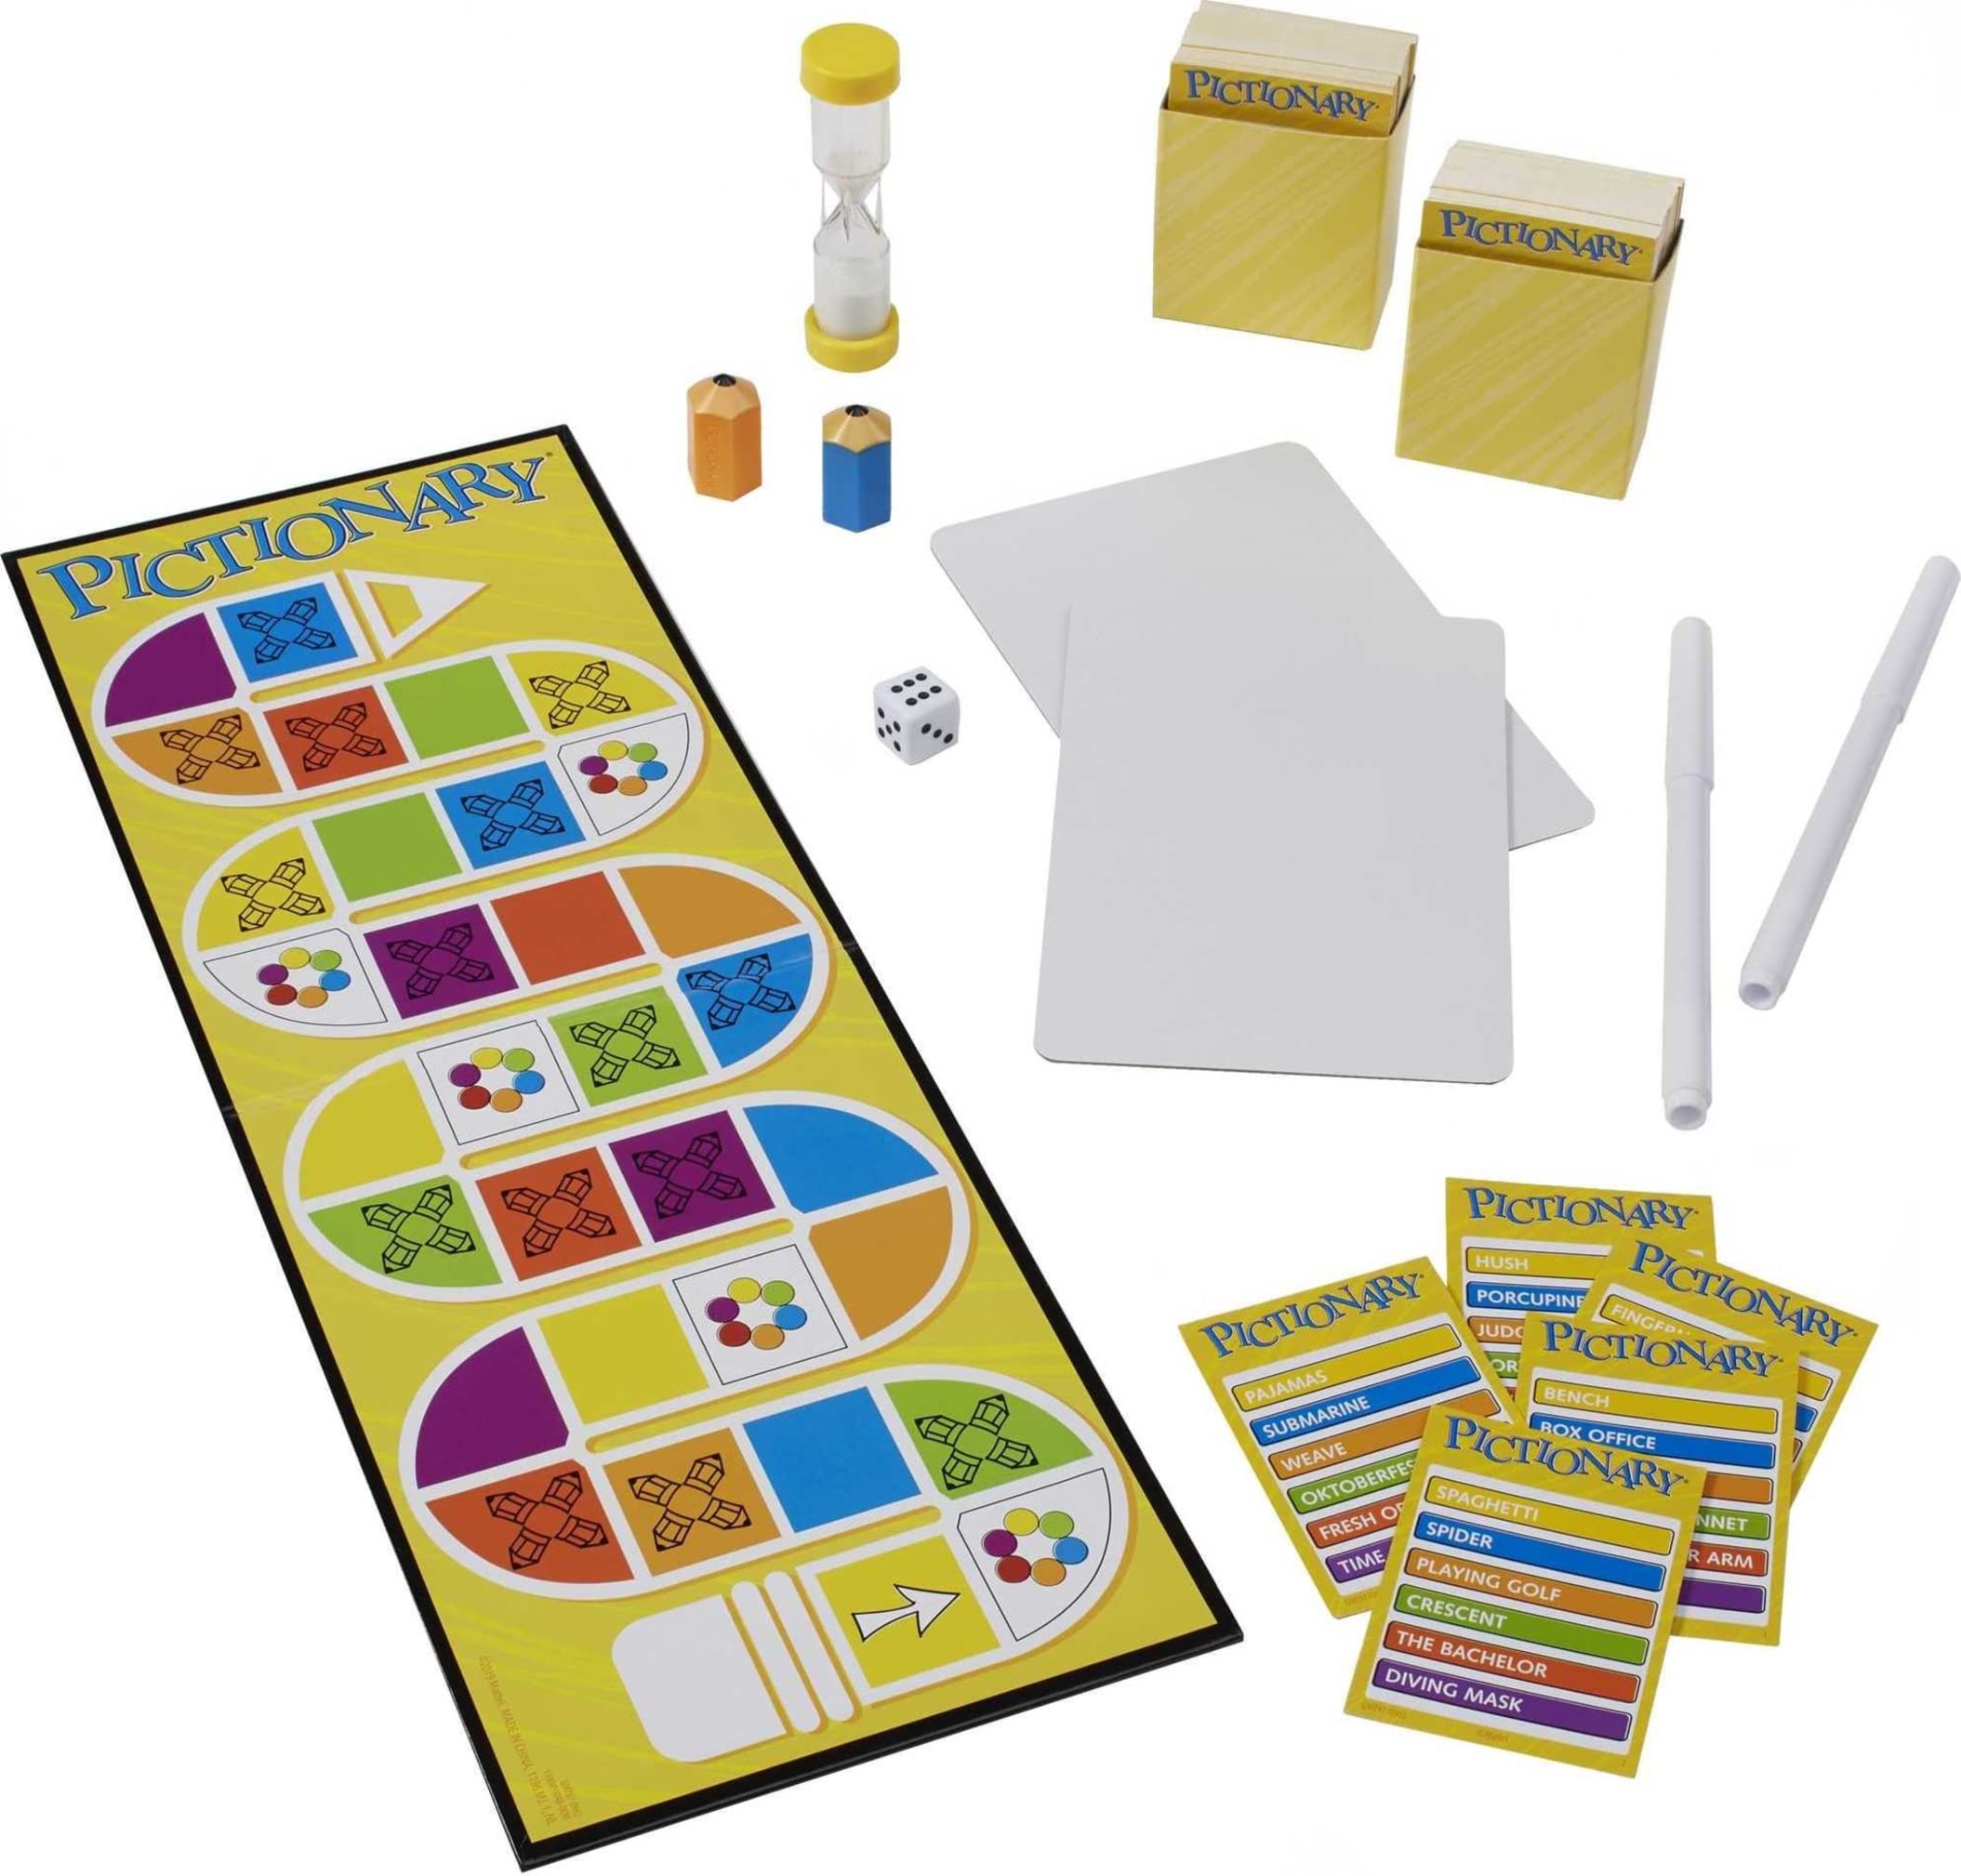 Mattel Games Pictionary Board Game, Drawing Game for Kids, Adults and Game Night, Unique Catch-All Category for 2 Teams (Amazon Exclusive)